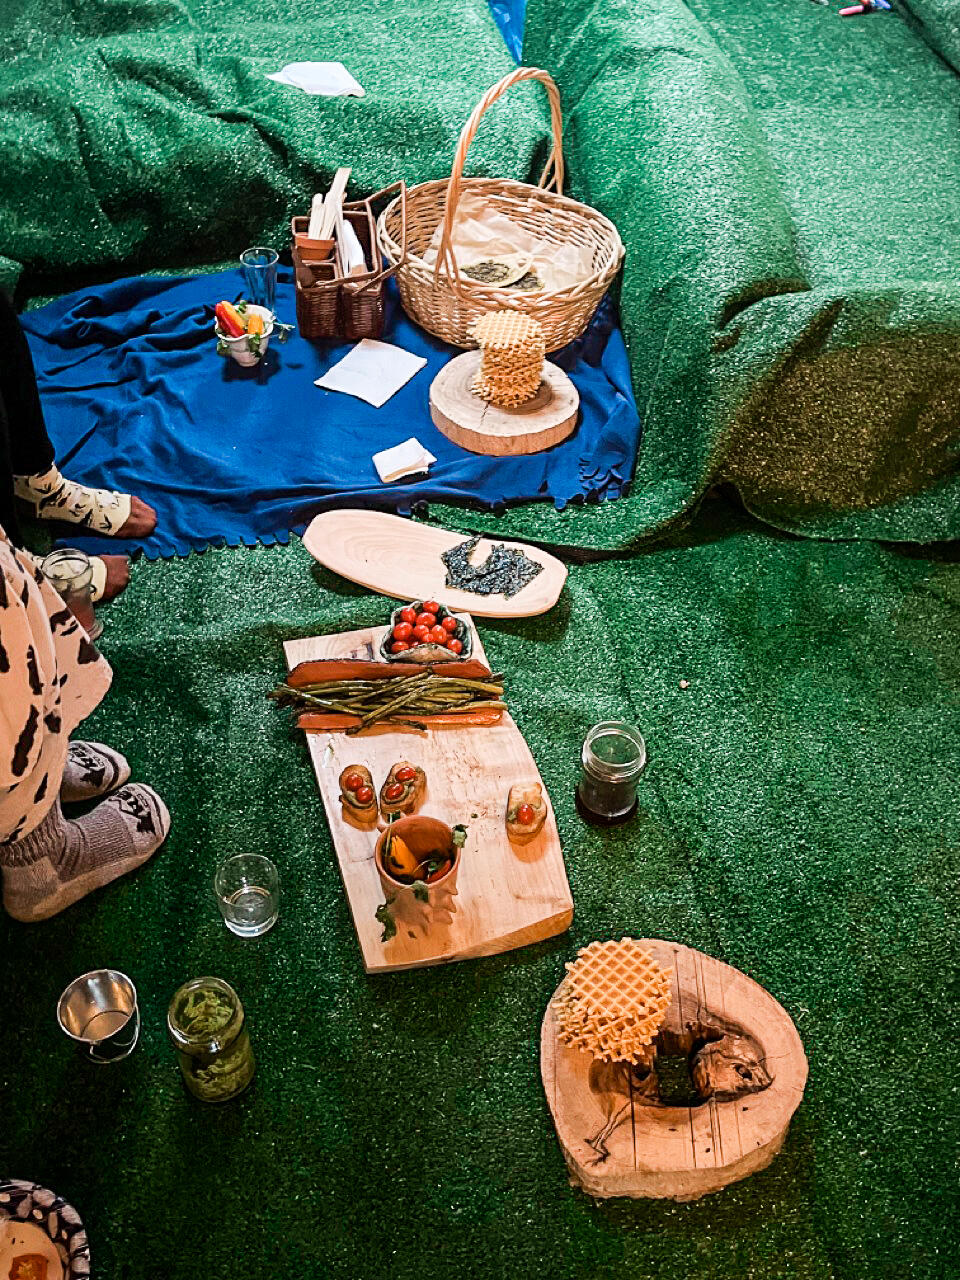 The green astroturf-covered floor of the apartment used for the indoor picnic. A blue blanket with a basket and a stack of waffle cookies, and other wooden food platters.